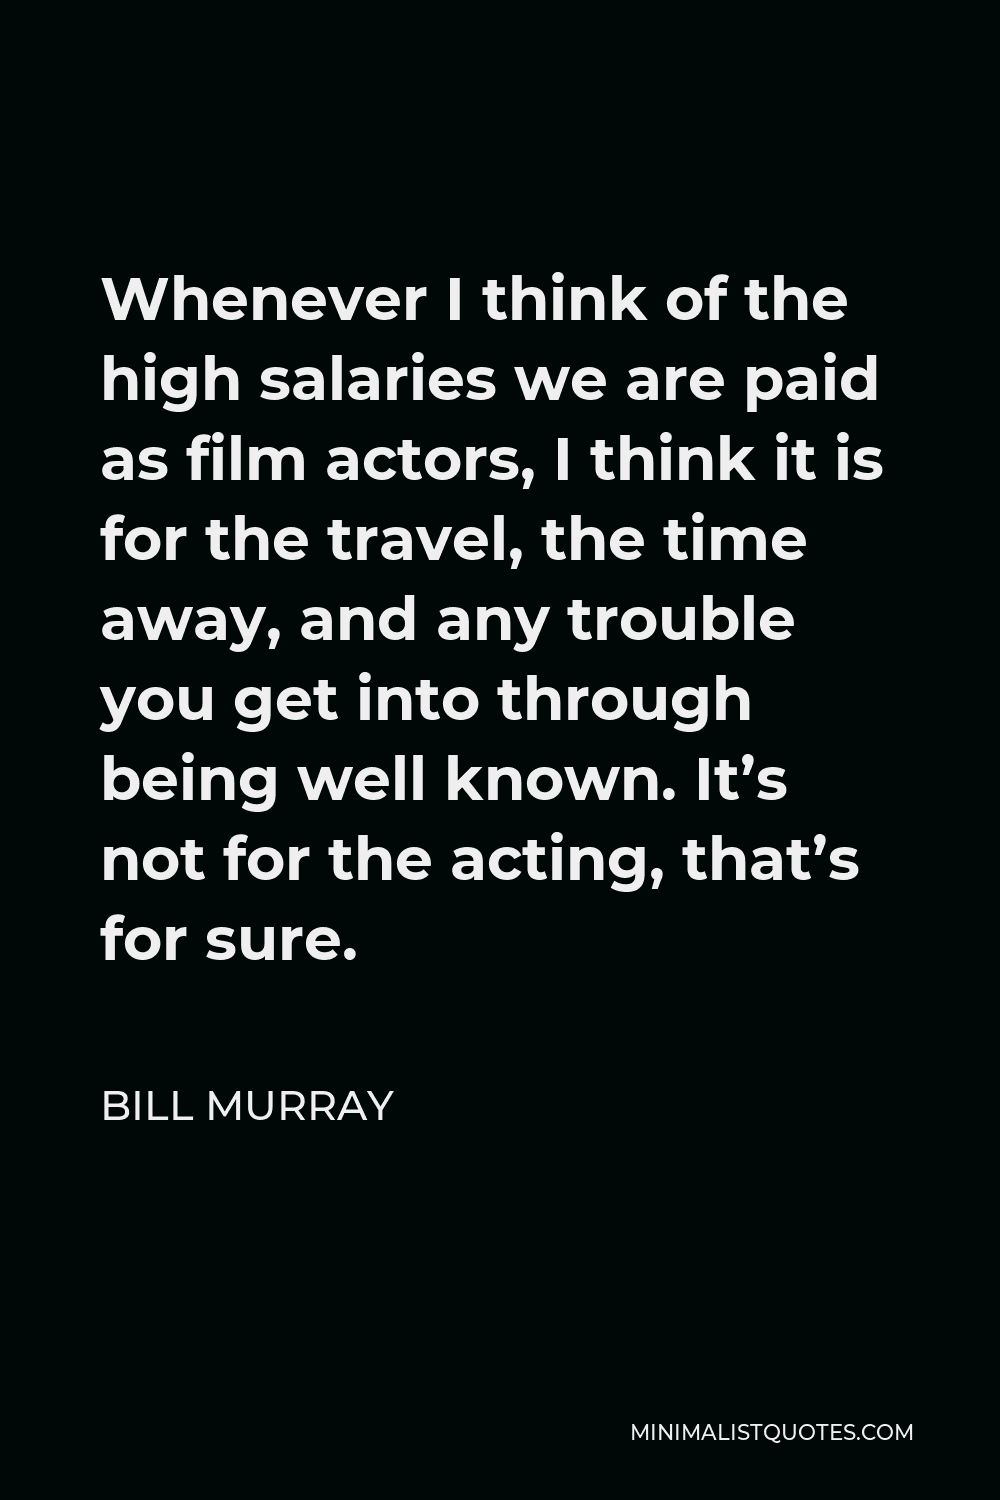 Bill Murray Quote - Whenever I think of the high salaries we are paid as film actors, I think it is for the travel, the time away, and any trouble you get into through being well known. It’s not for the acting, that’s for sure.